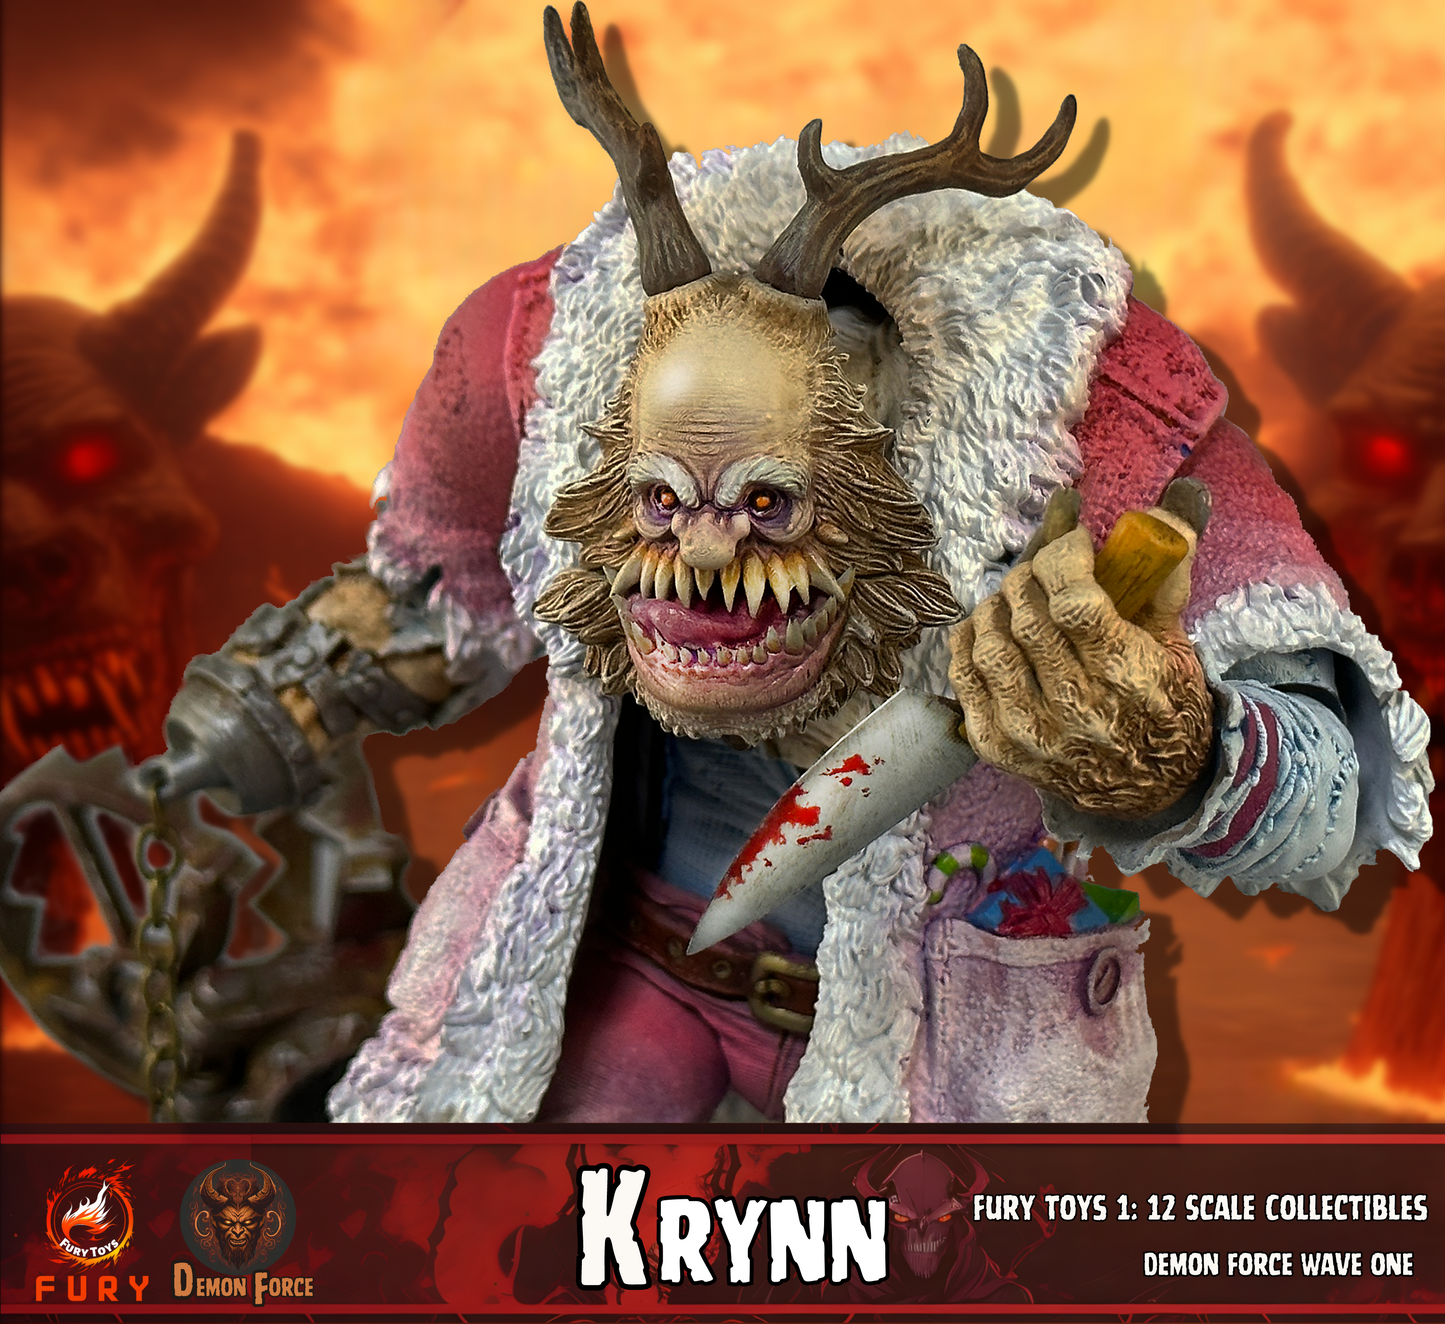 Fury toys Demon Force wave 1 1/12 The brother Kraden and Krynn